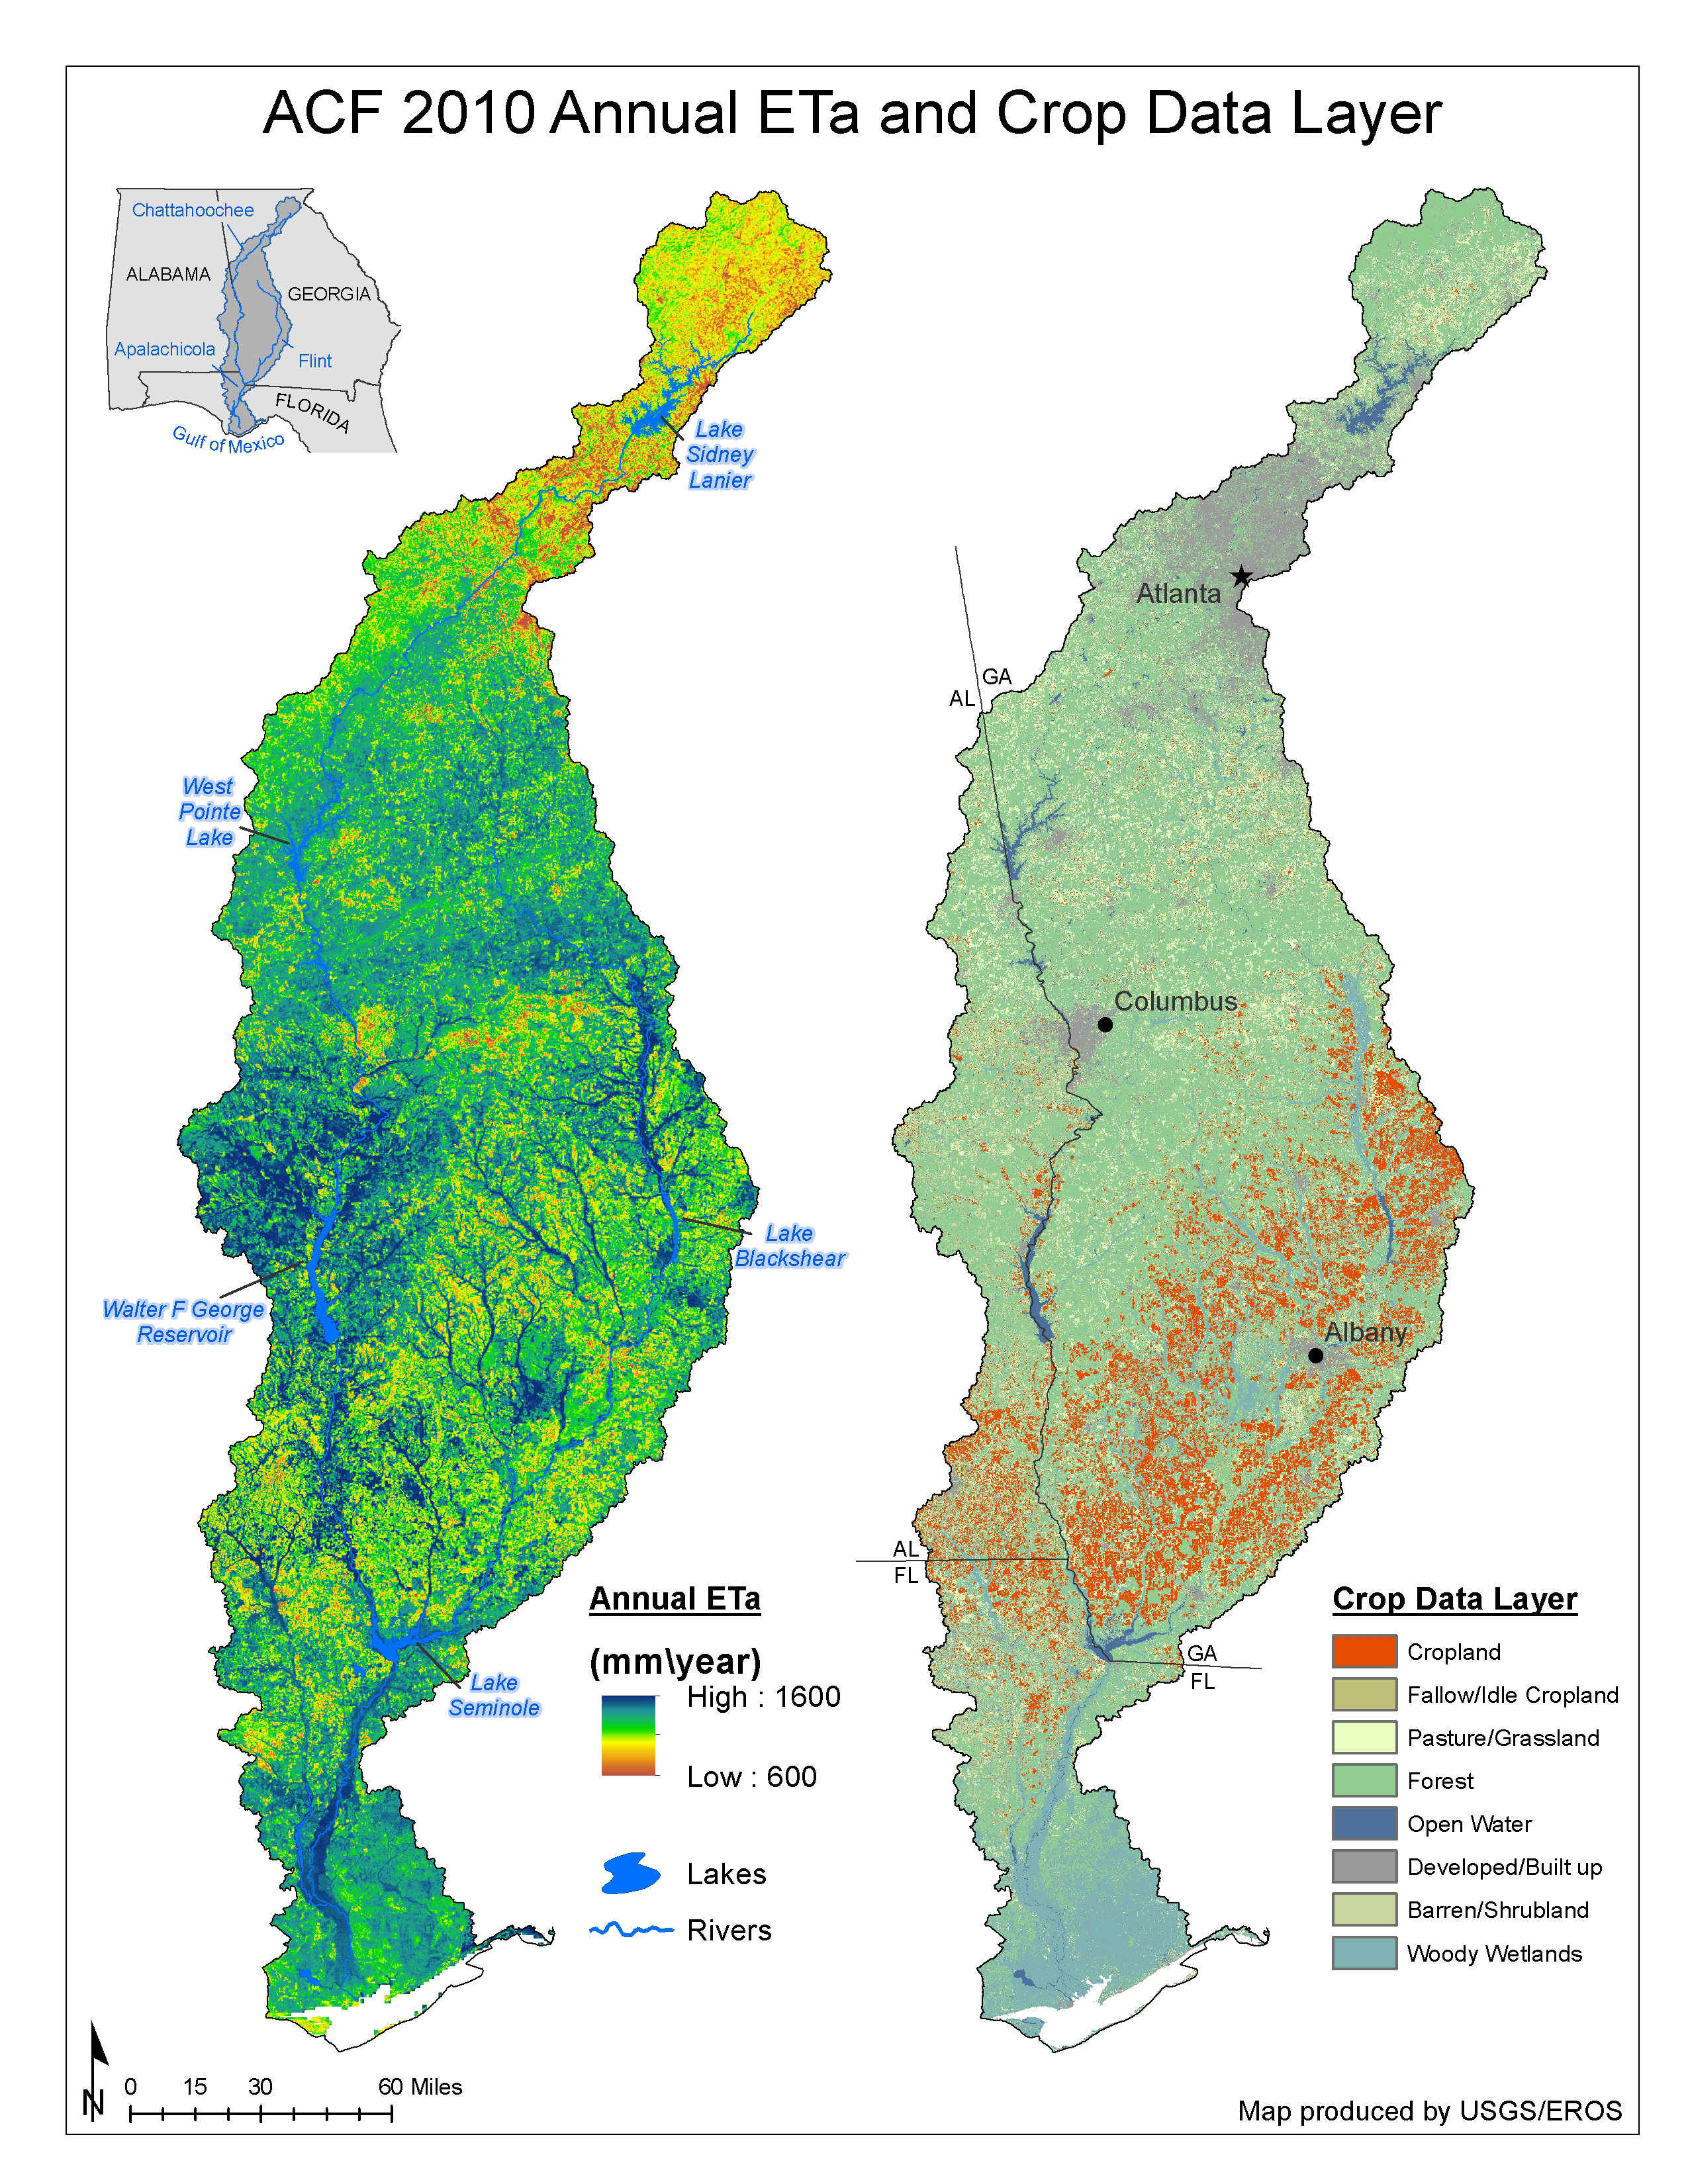 Annual evapotranspiration map and a crop data layer for 2010 in the Apalachicola-Chattahoochee-Flint River Basin.